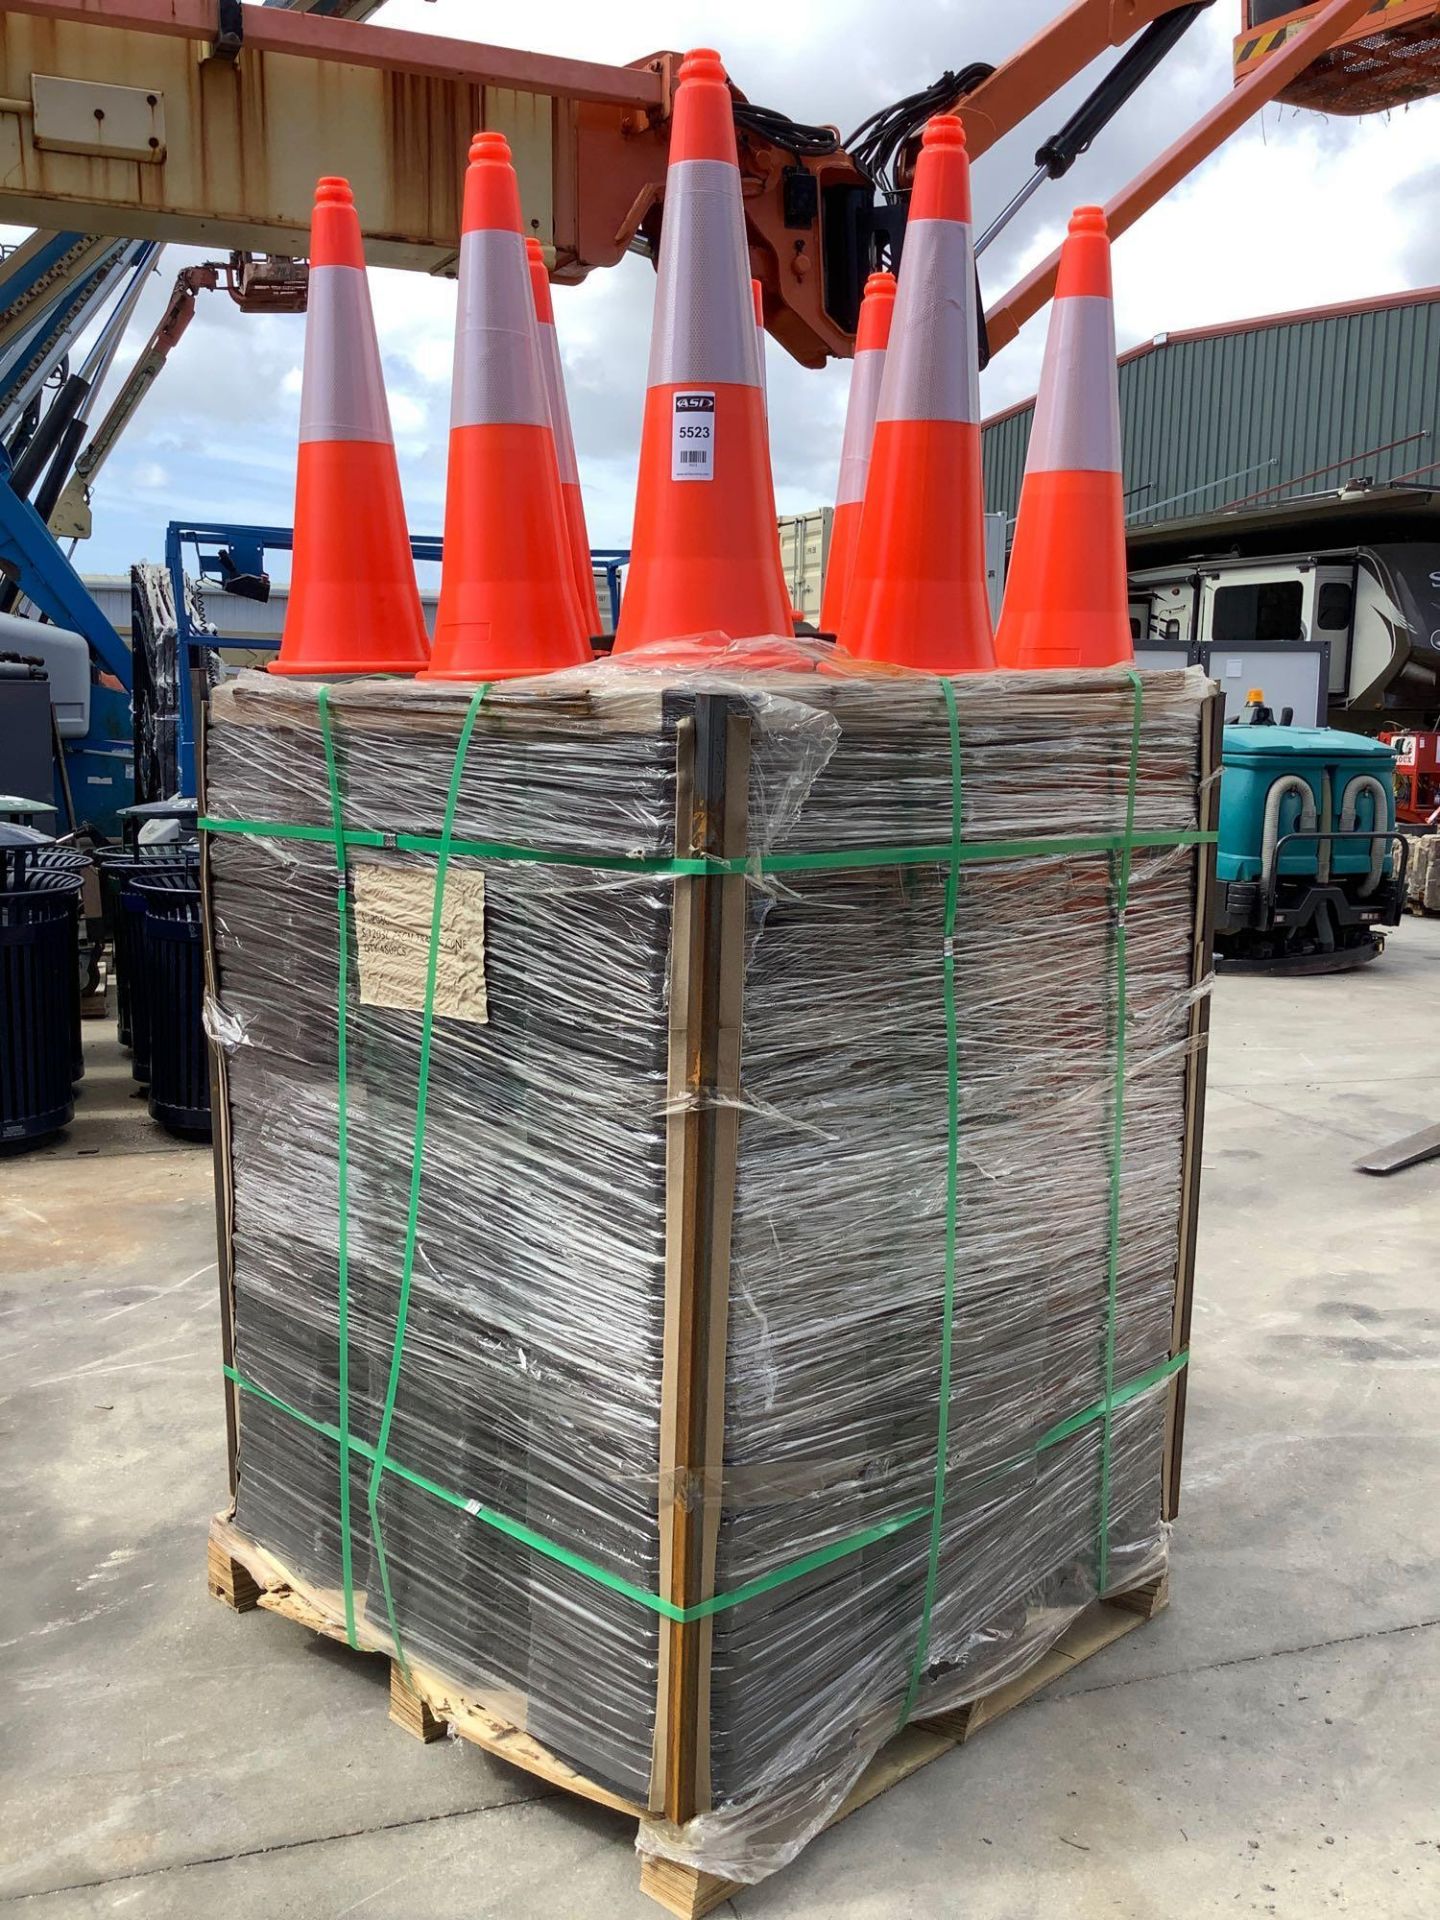 75 UNUSED PVC SAFETY TRAFFIC HIGHWAY CONES APPROX 28IN